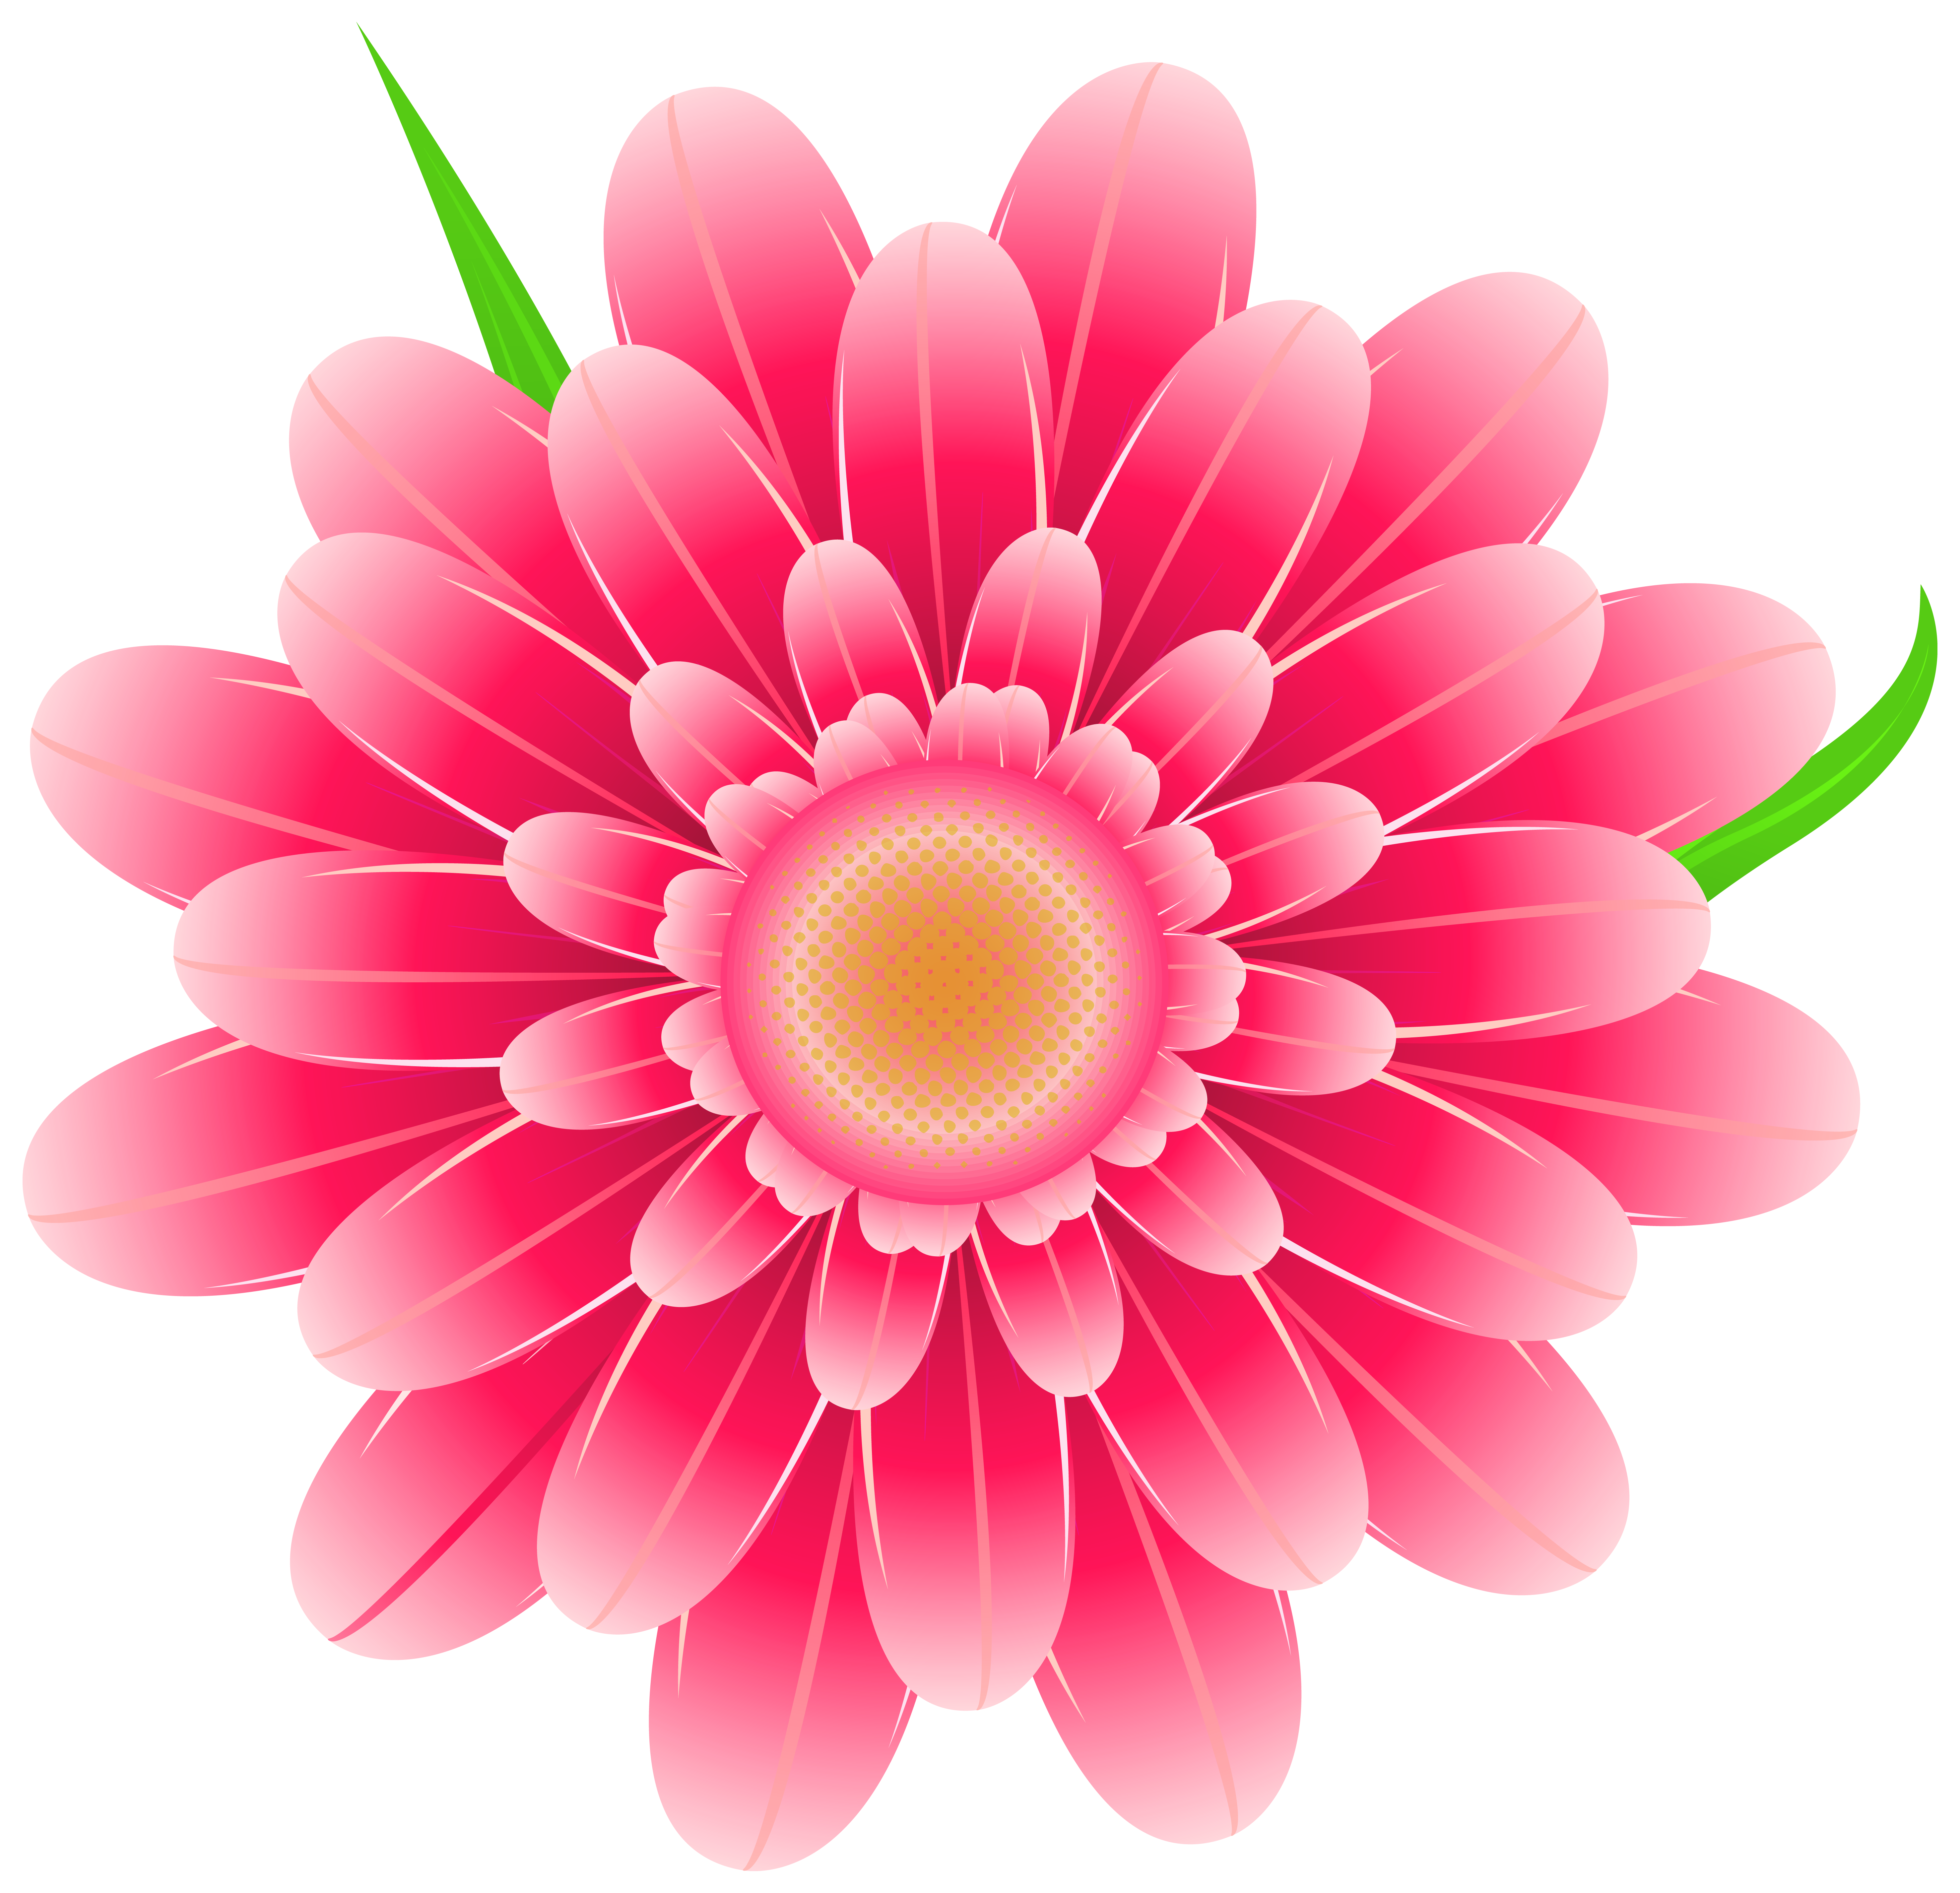 free flower clipart with transparent background - photo #18